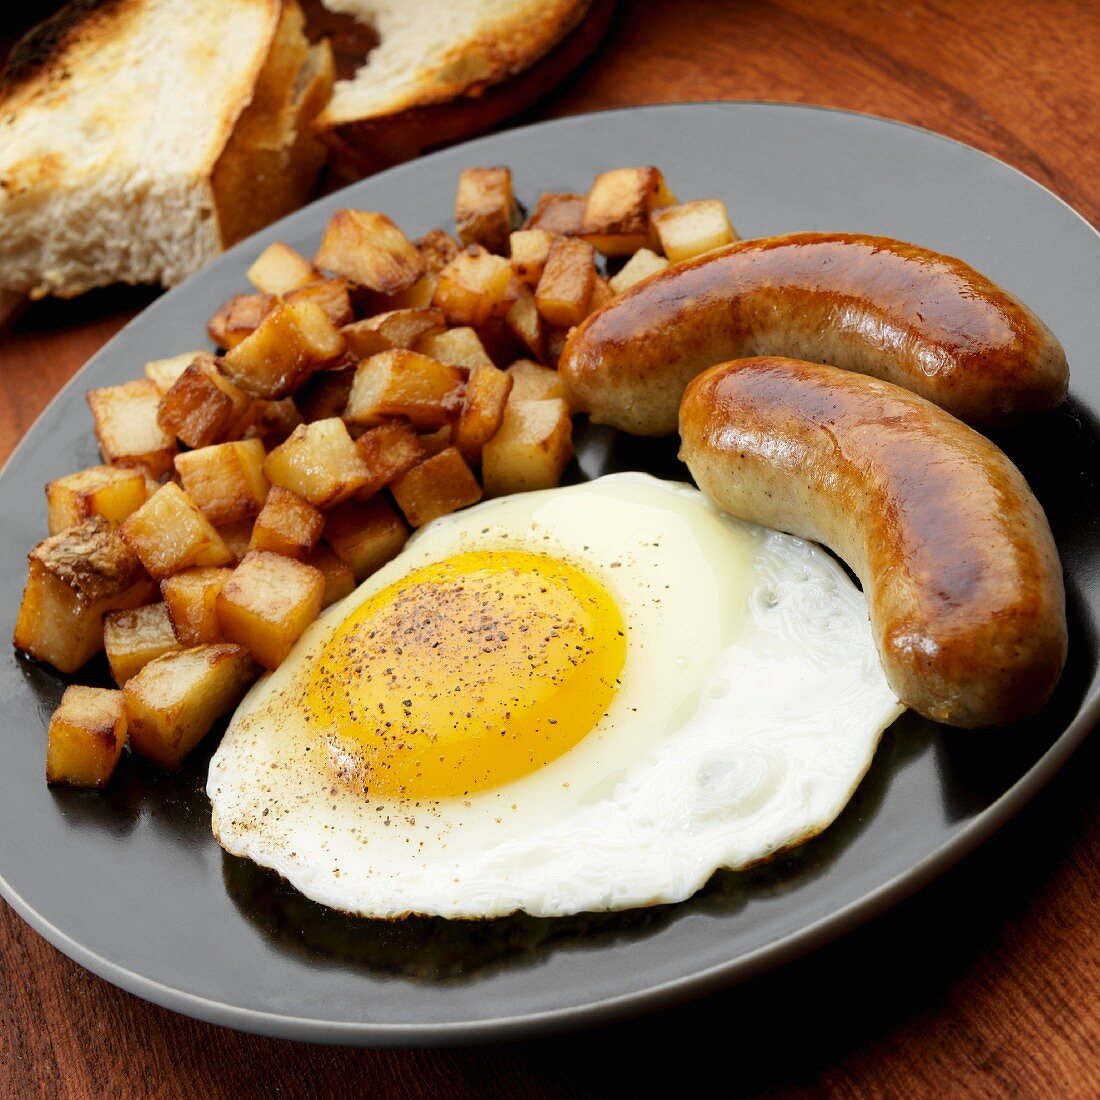 Fried egg with two bangers